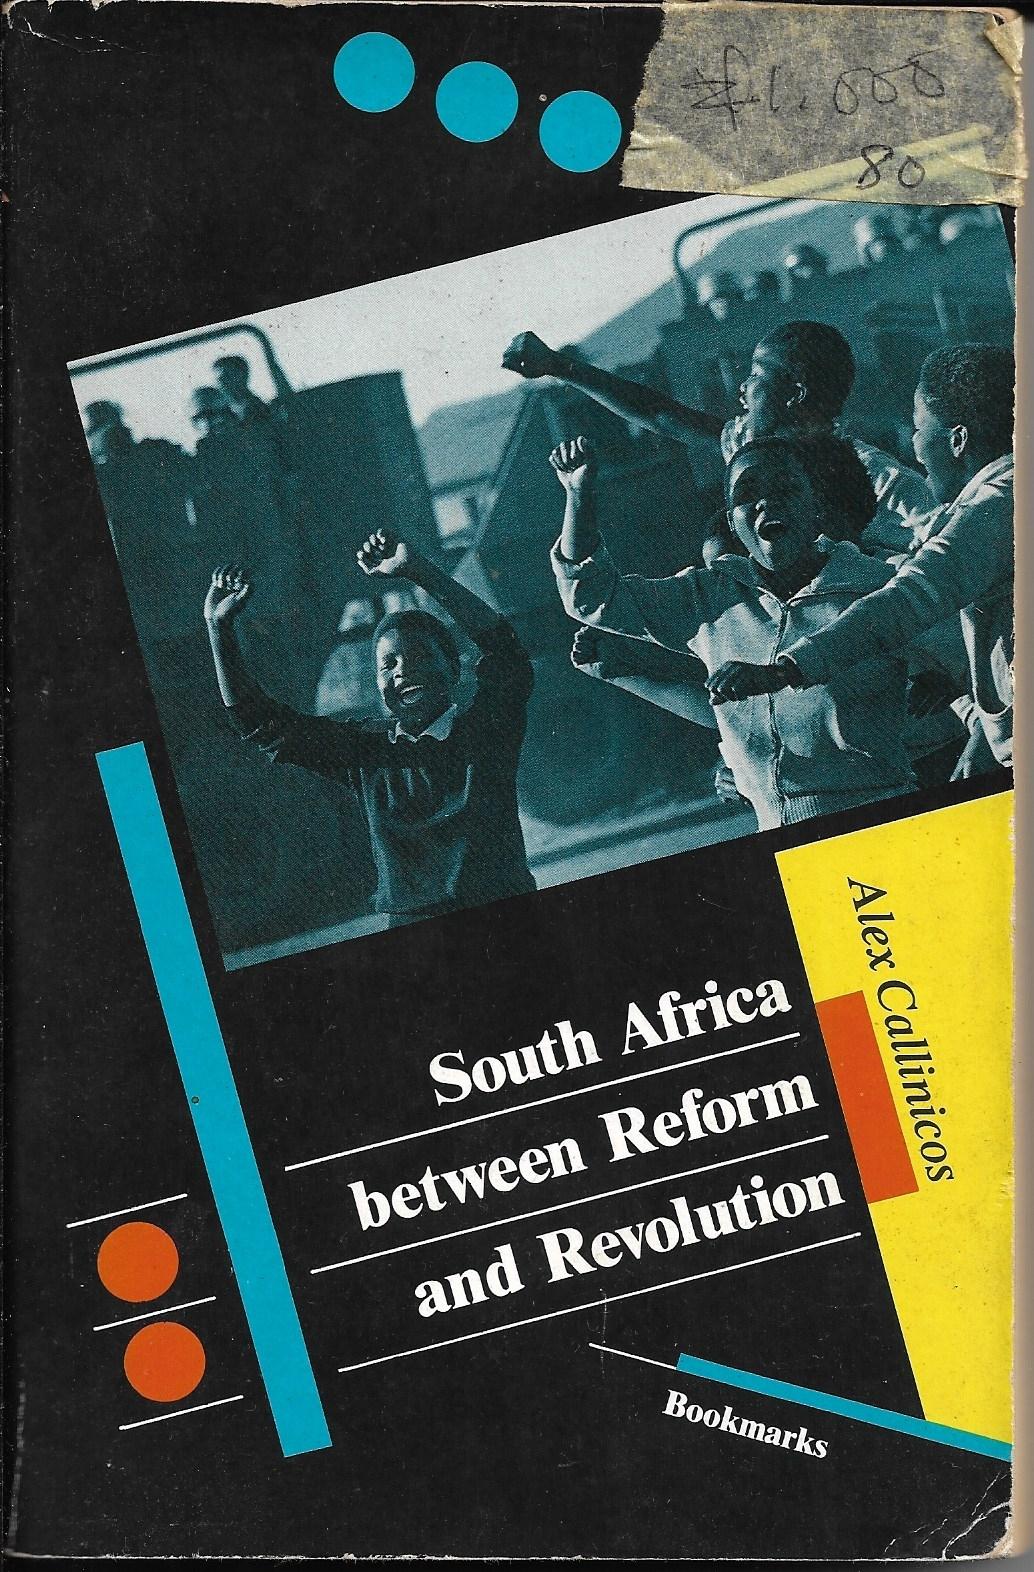 South Africa between Reform and Revolution